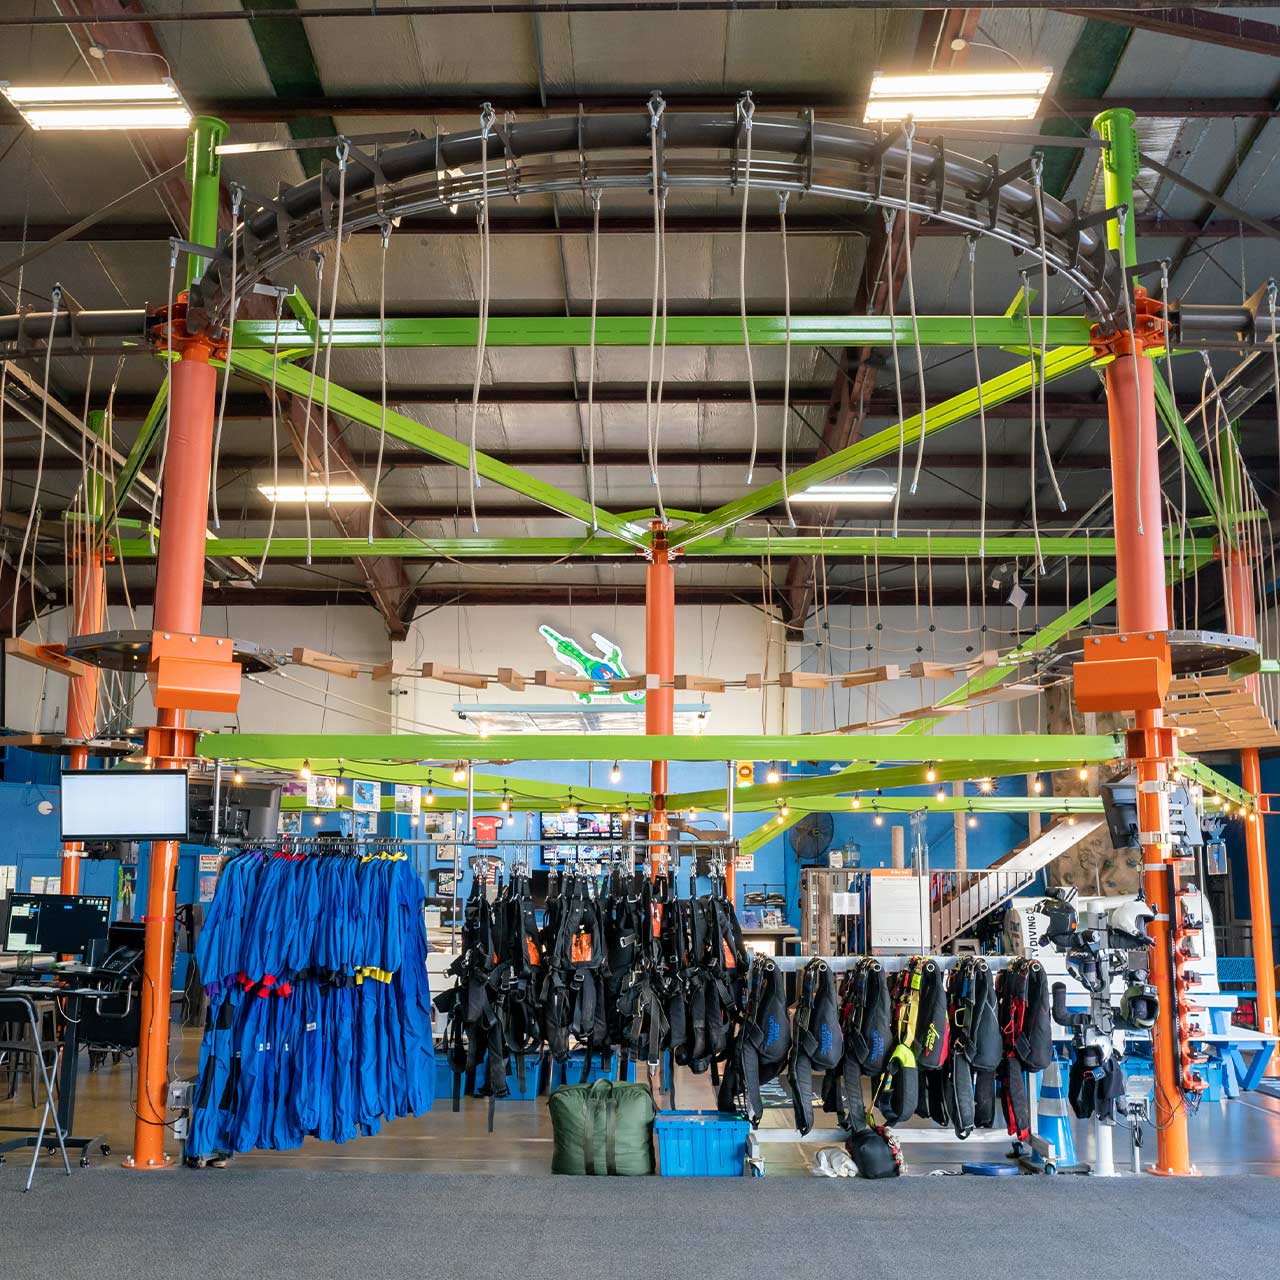 Interior view of the lime green and orange high ropes course within the hangar at Start Skydiving.